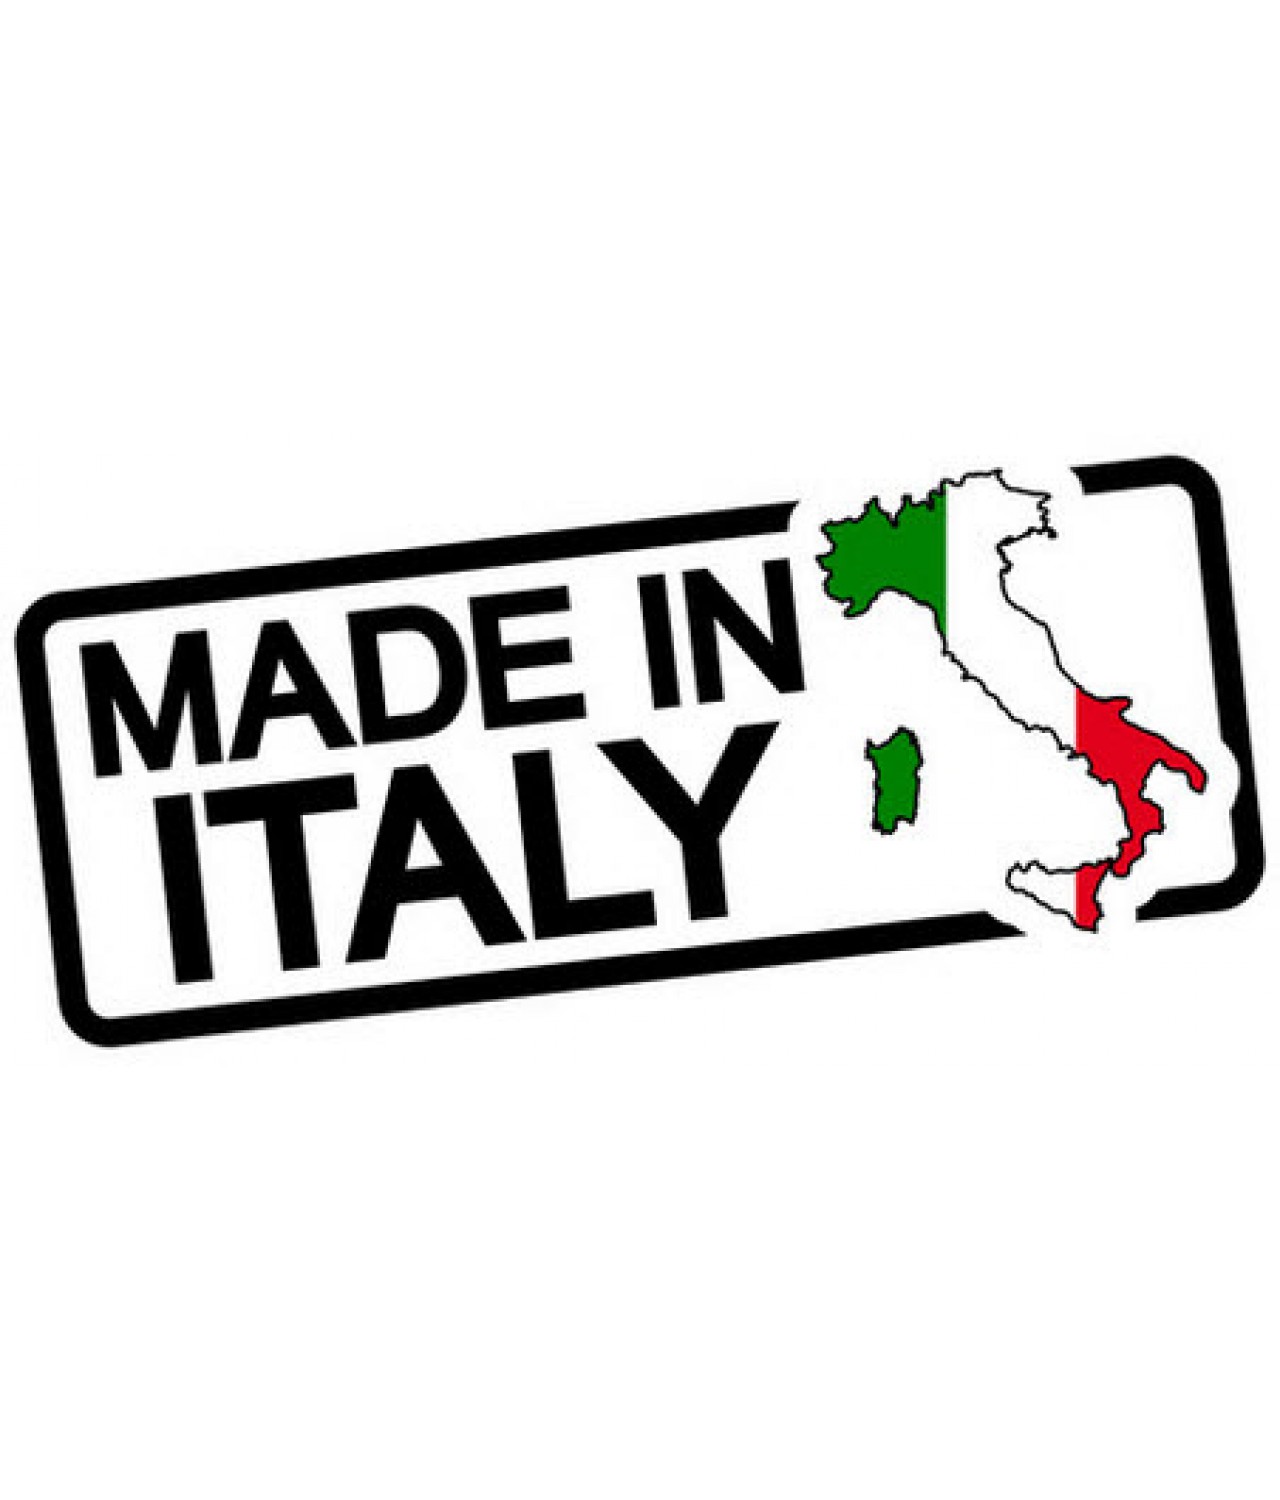 @max - Made in Italy